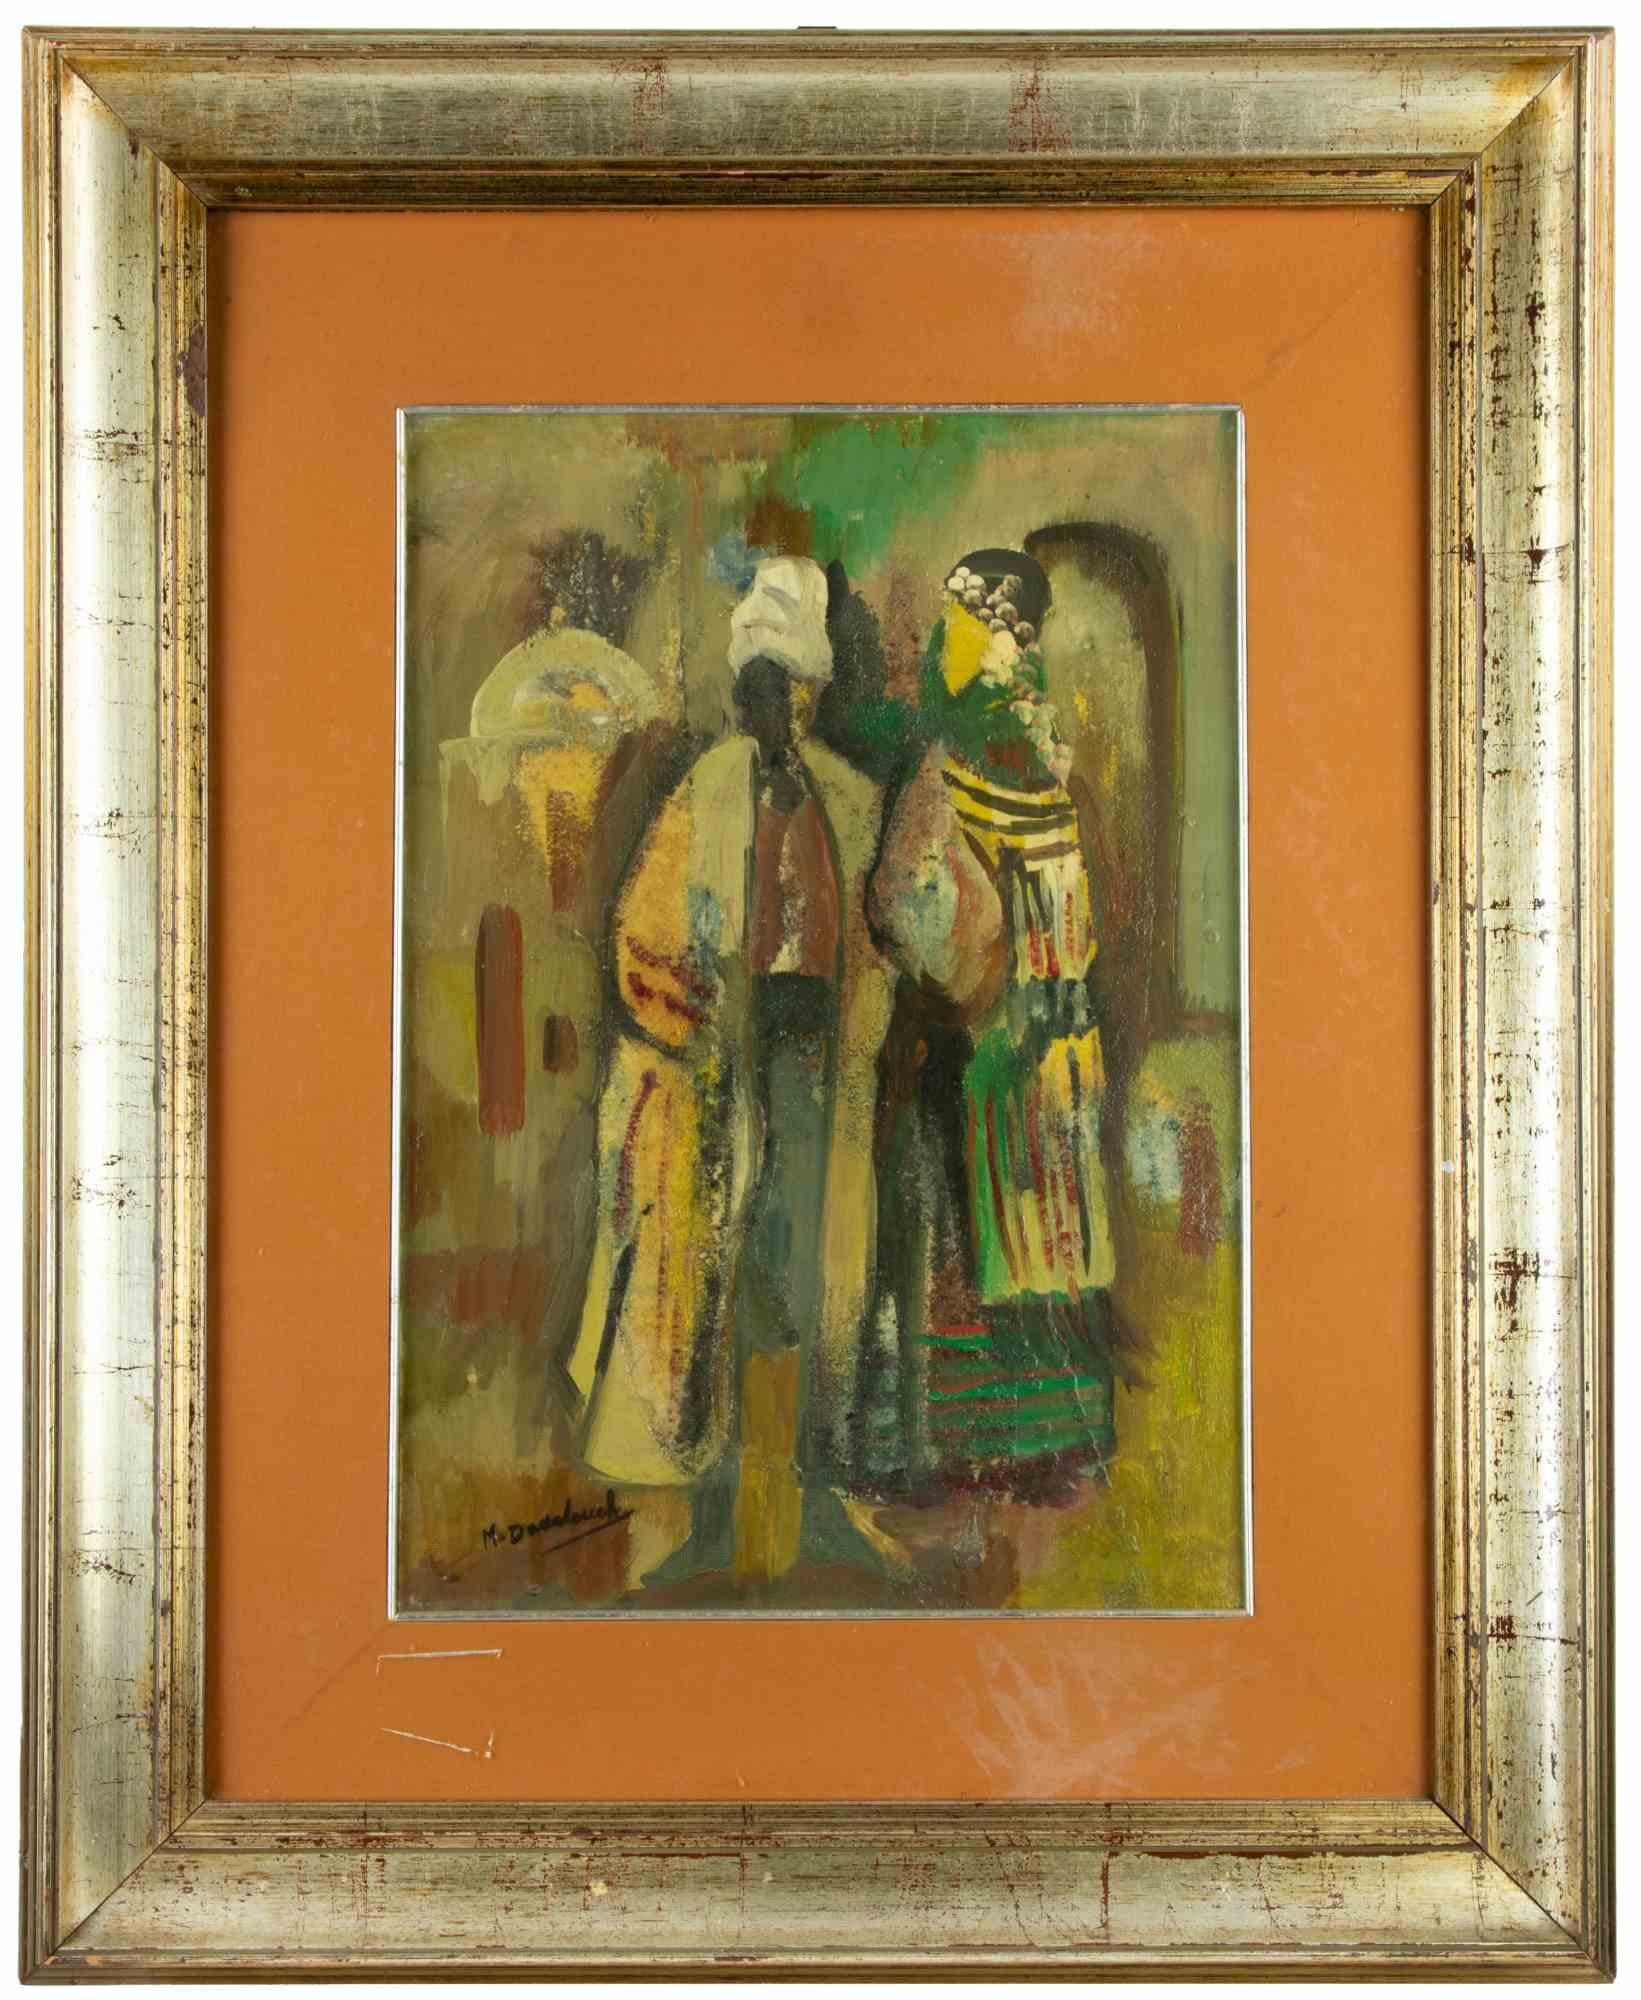 Unknown Figurative Painting - Oriental Figures - Oil on Canvas - 1970s